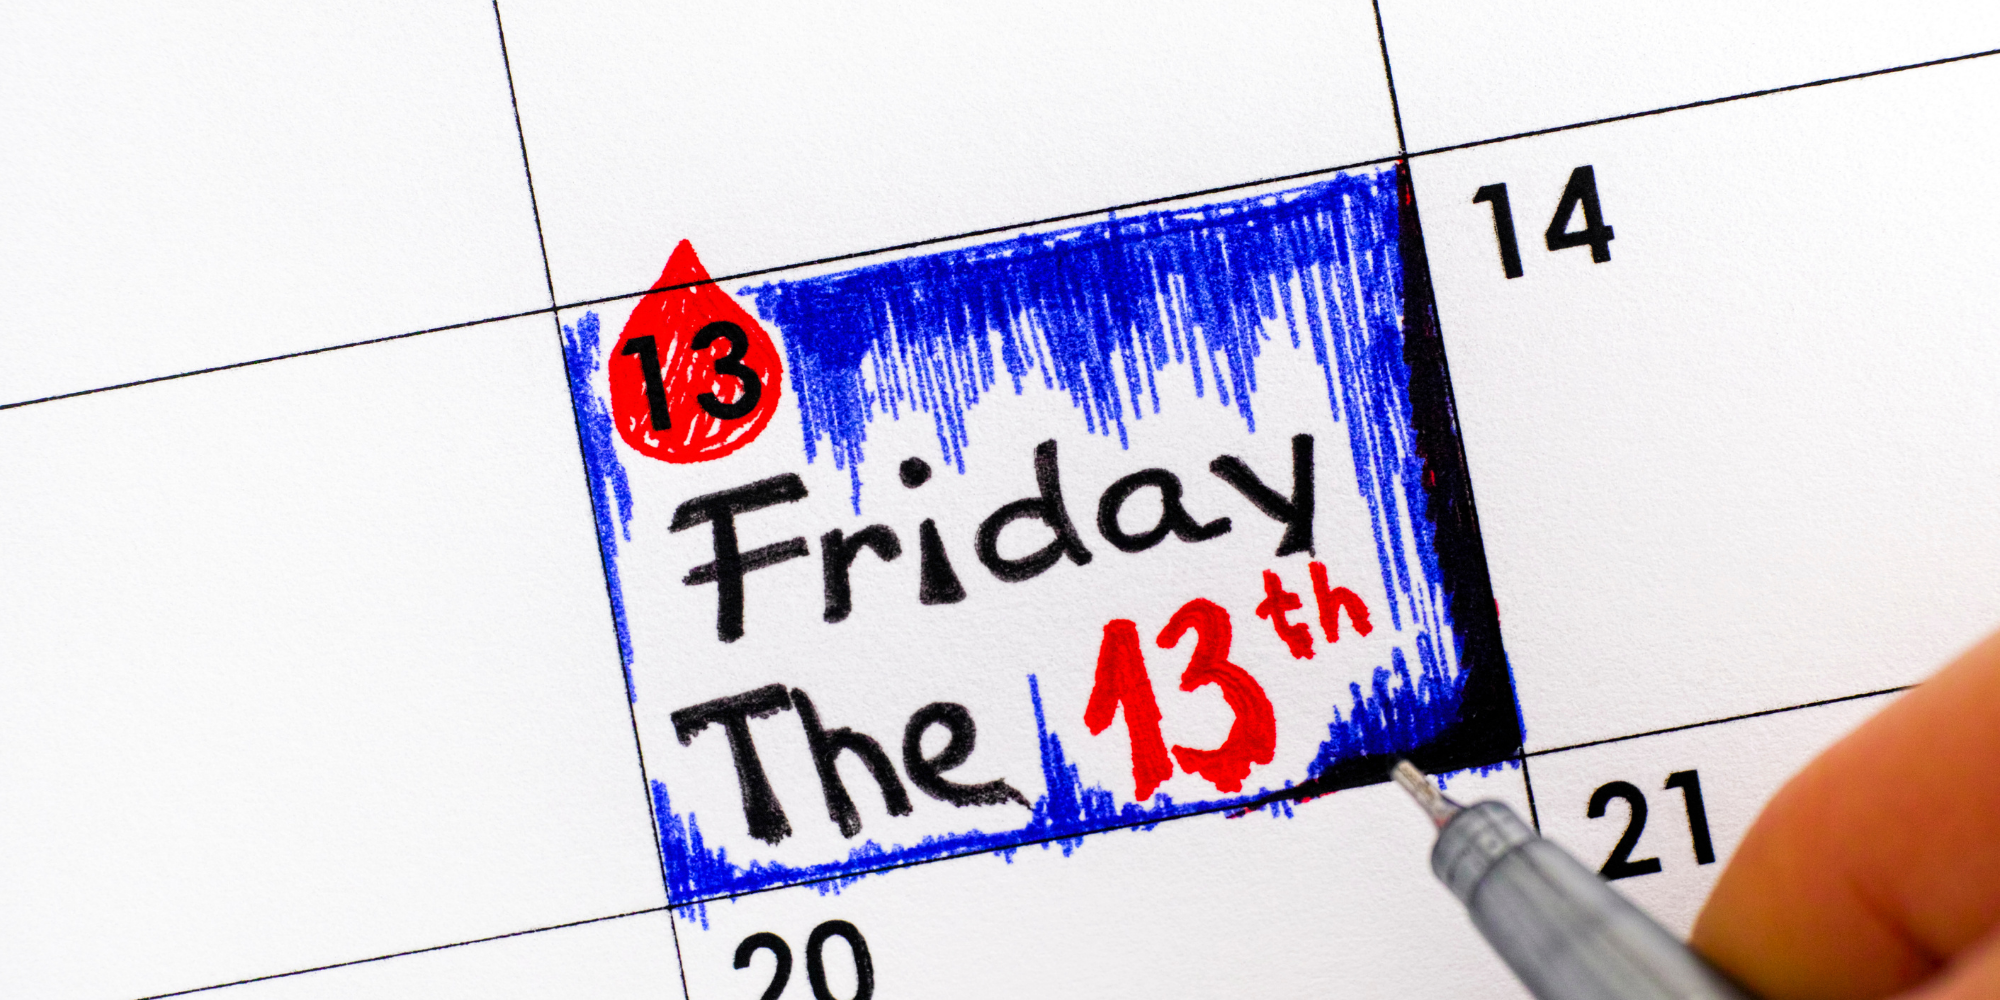 13 Of The Best Jokes And Memes About Friday The 13th From Across The Internet Indy100 Indy100